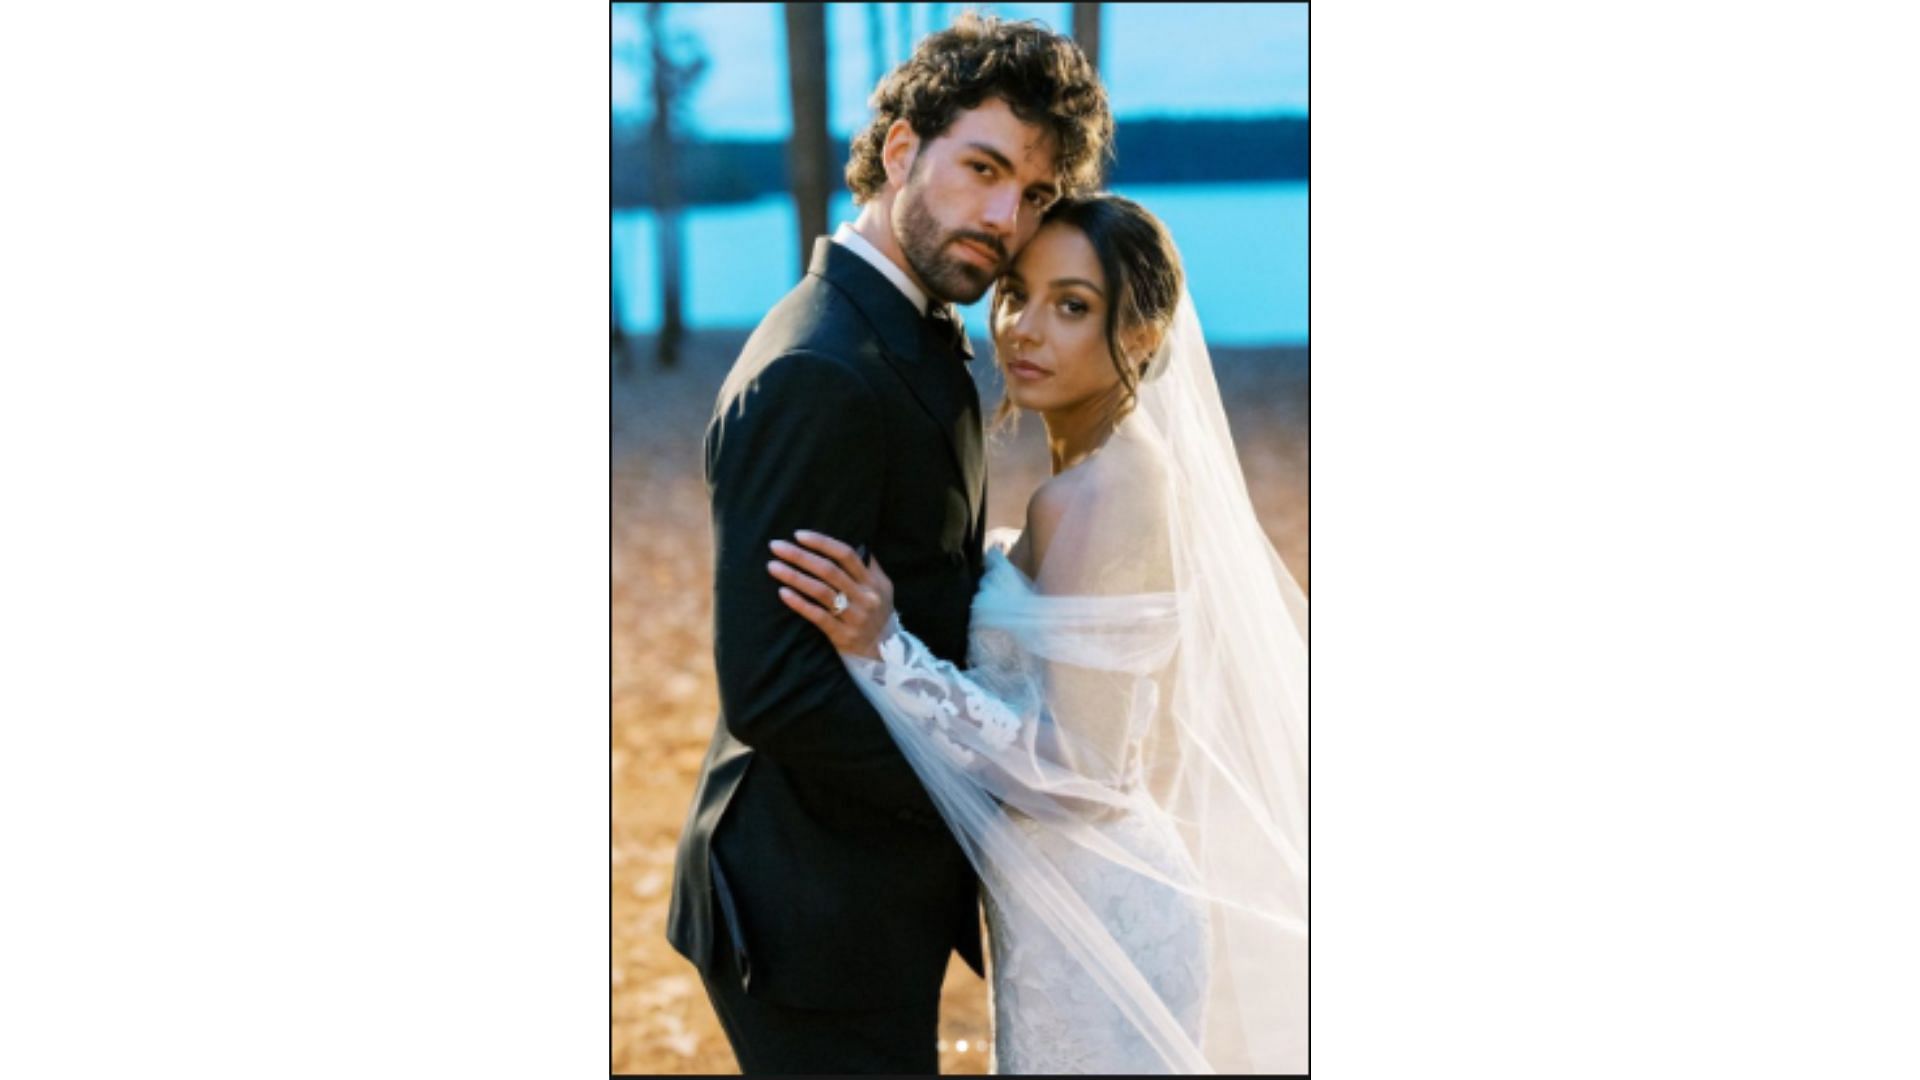 Dansby Swanson with his wife